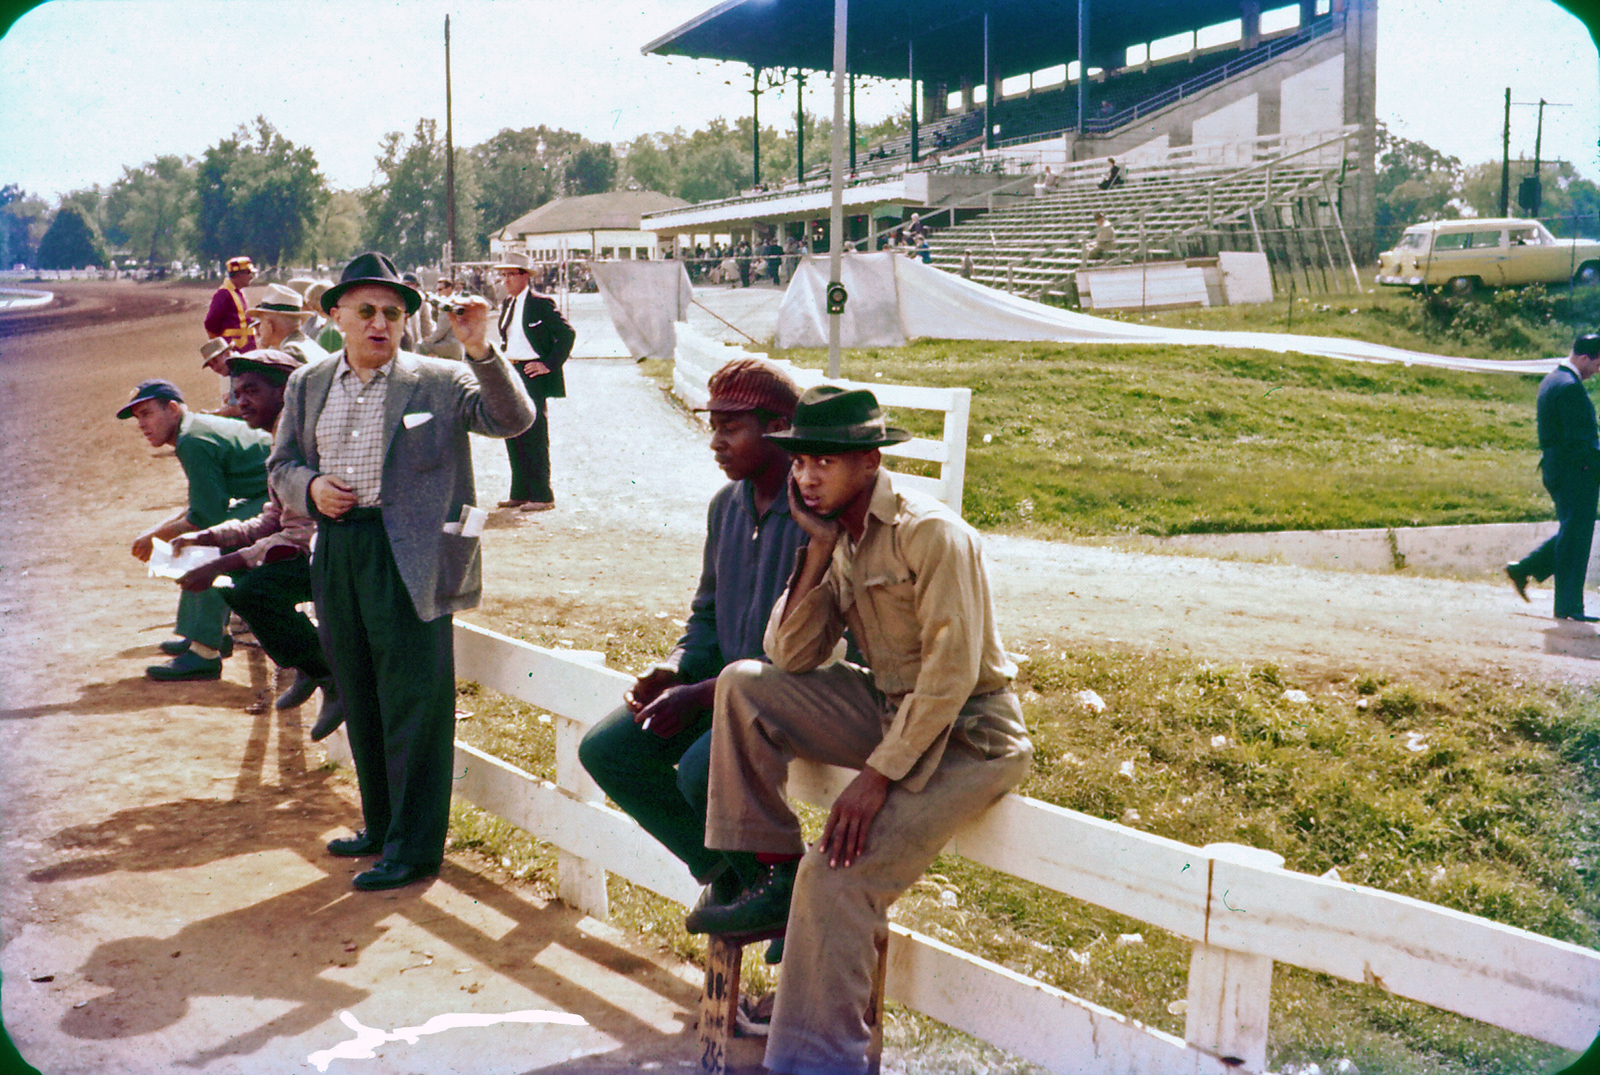 Everyone in this picture is looking to make some money today.  Taken by my grandfather in the mid-1950s at Keeneland Racetrack in Lexington, Kentucky. View full size.